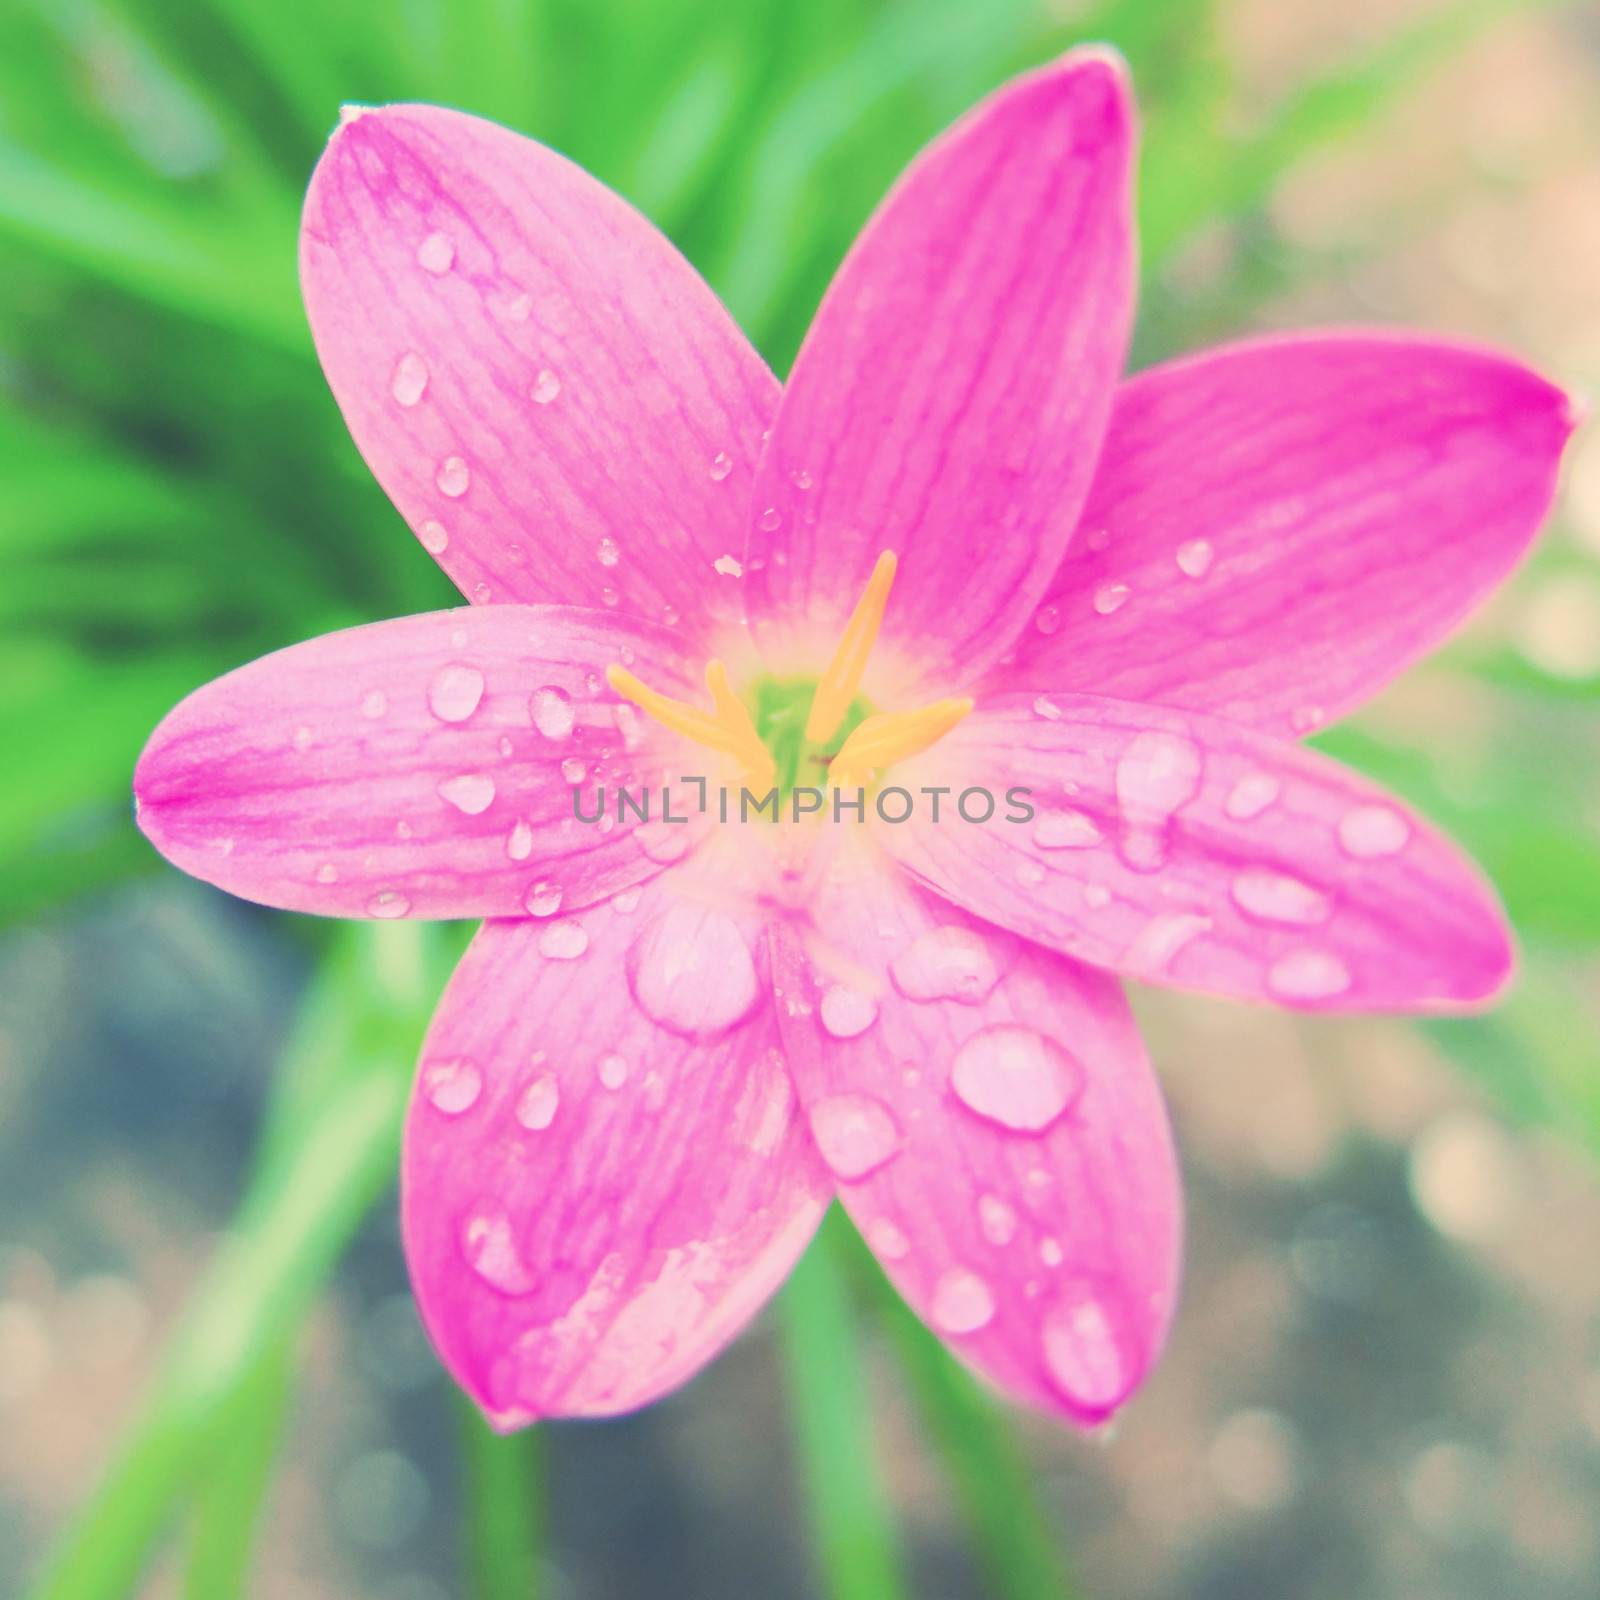 Pink blossom flower with retro filter effect 